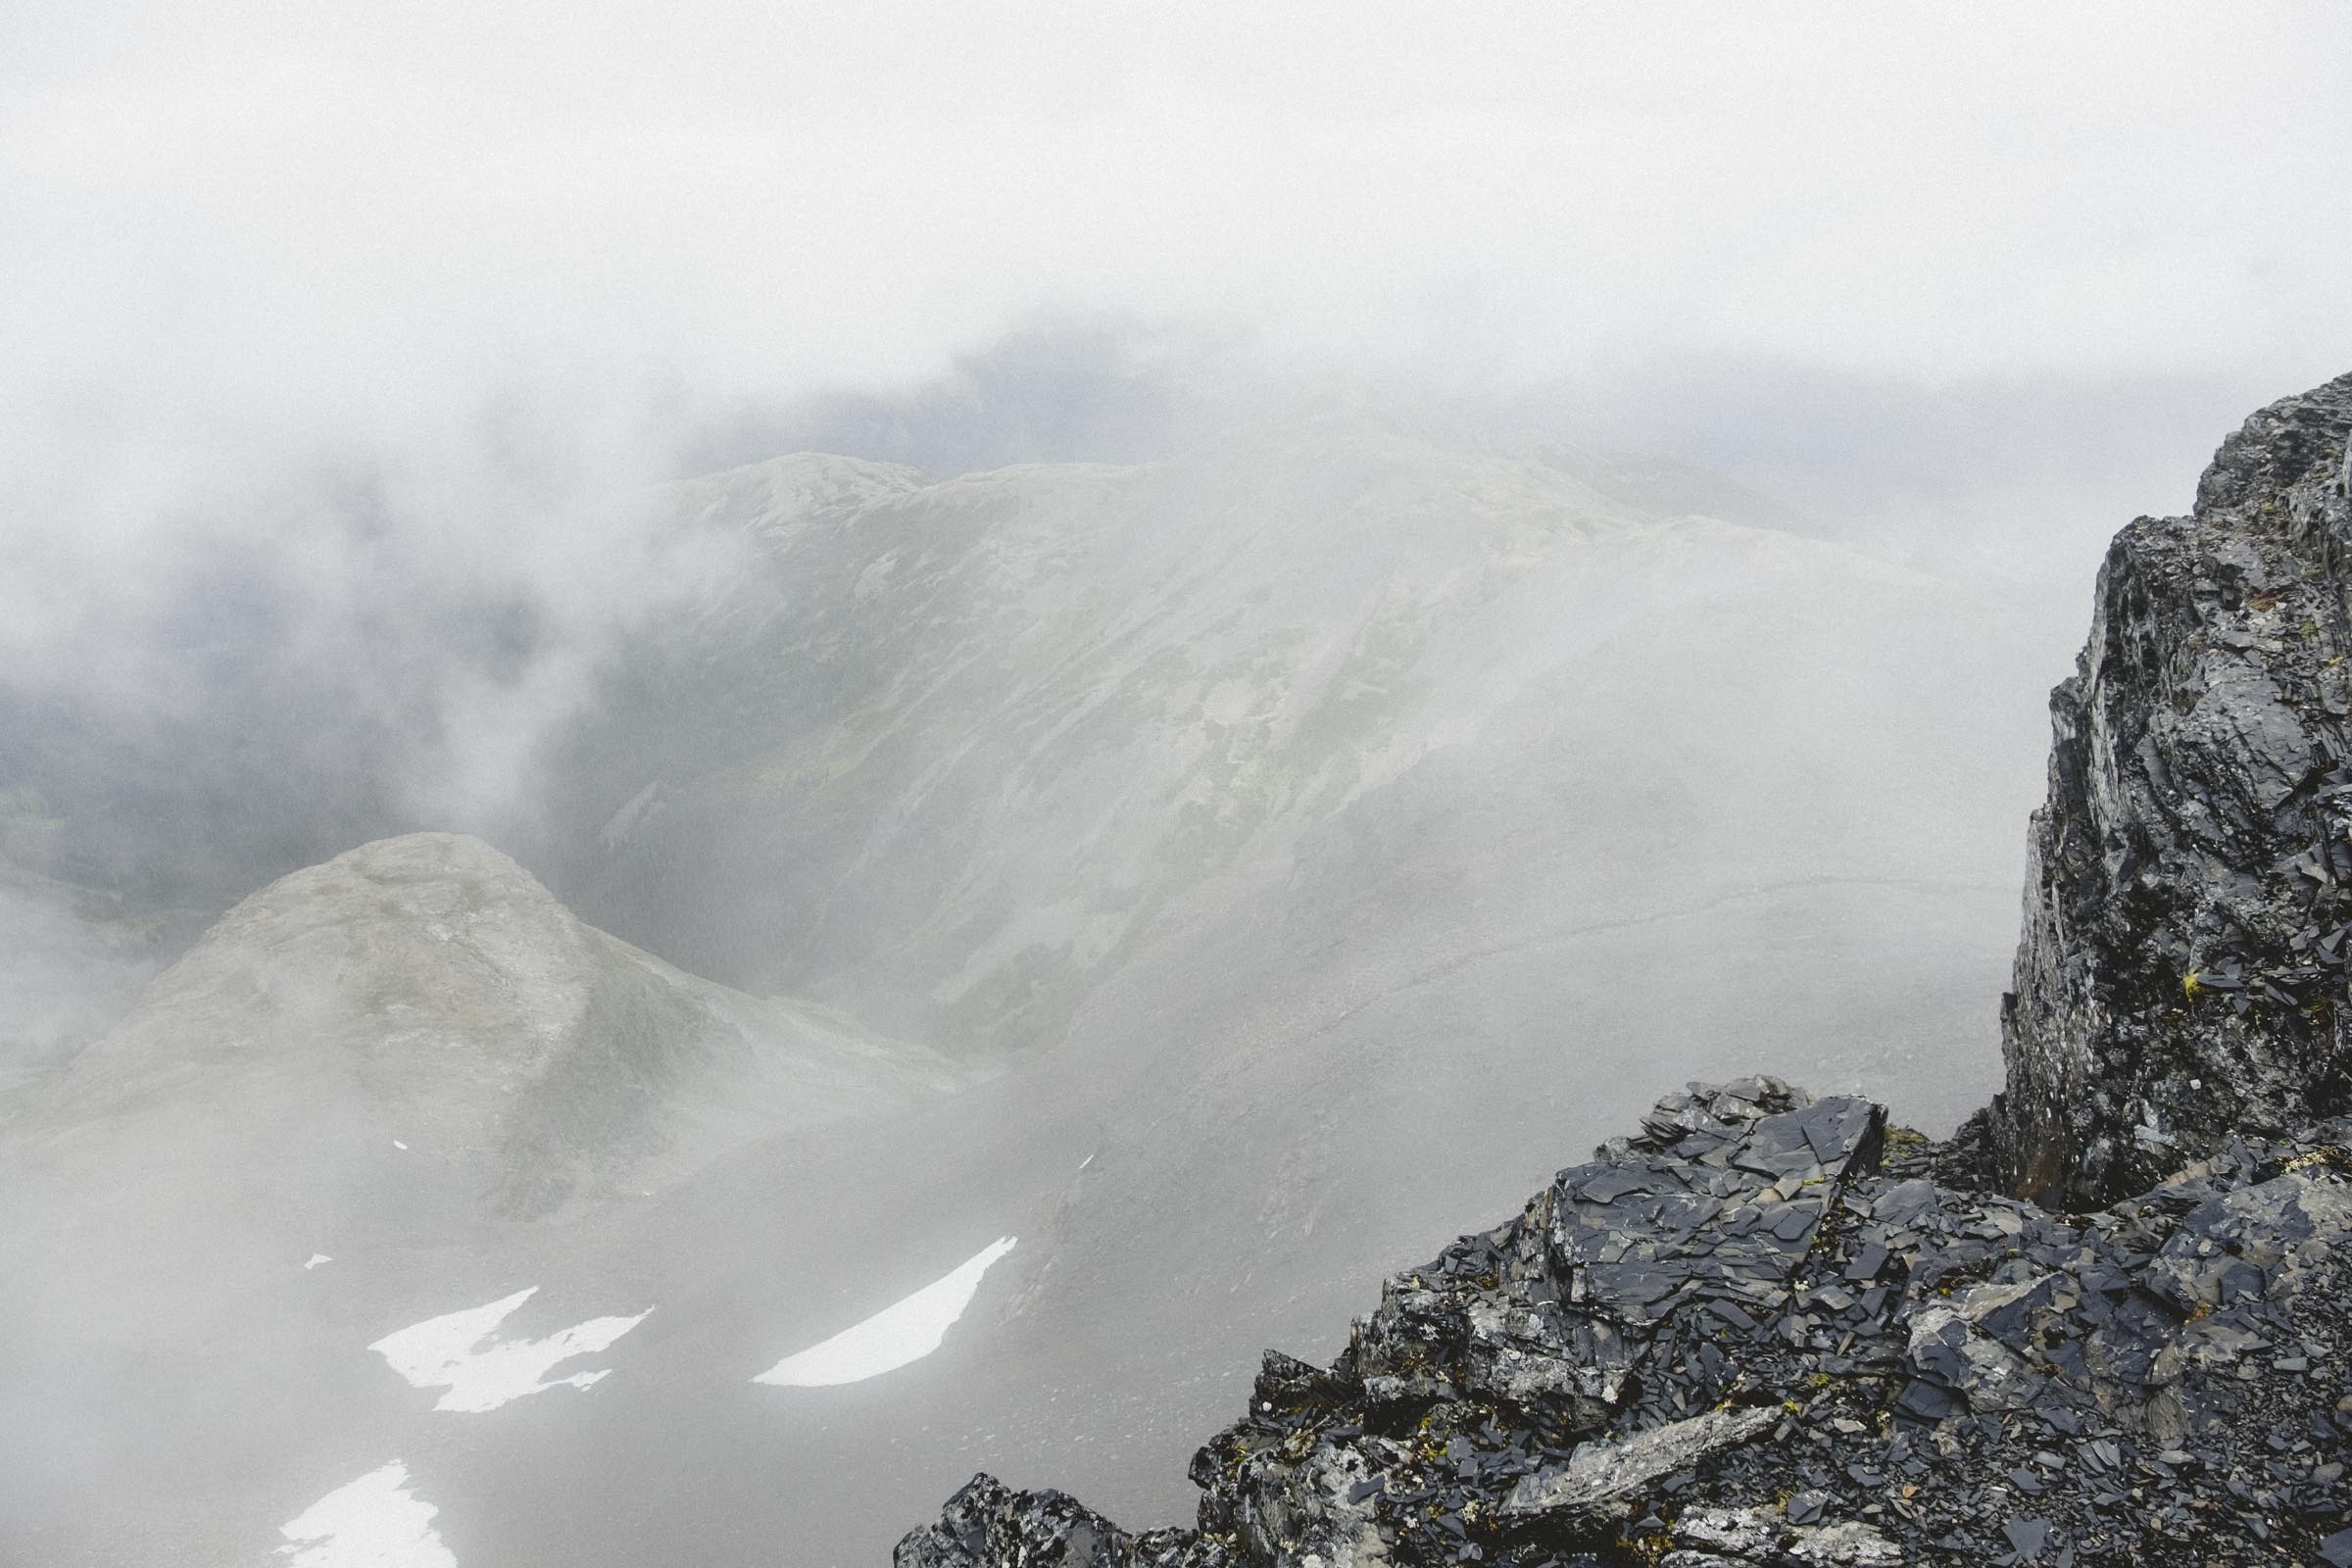 Clouds and fog in the mountain landscape of Gitksan Peak